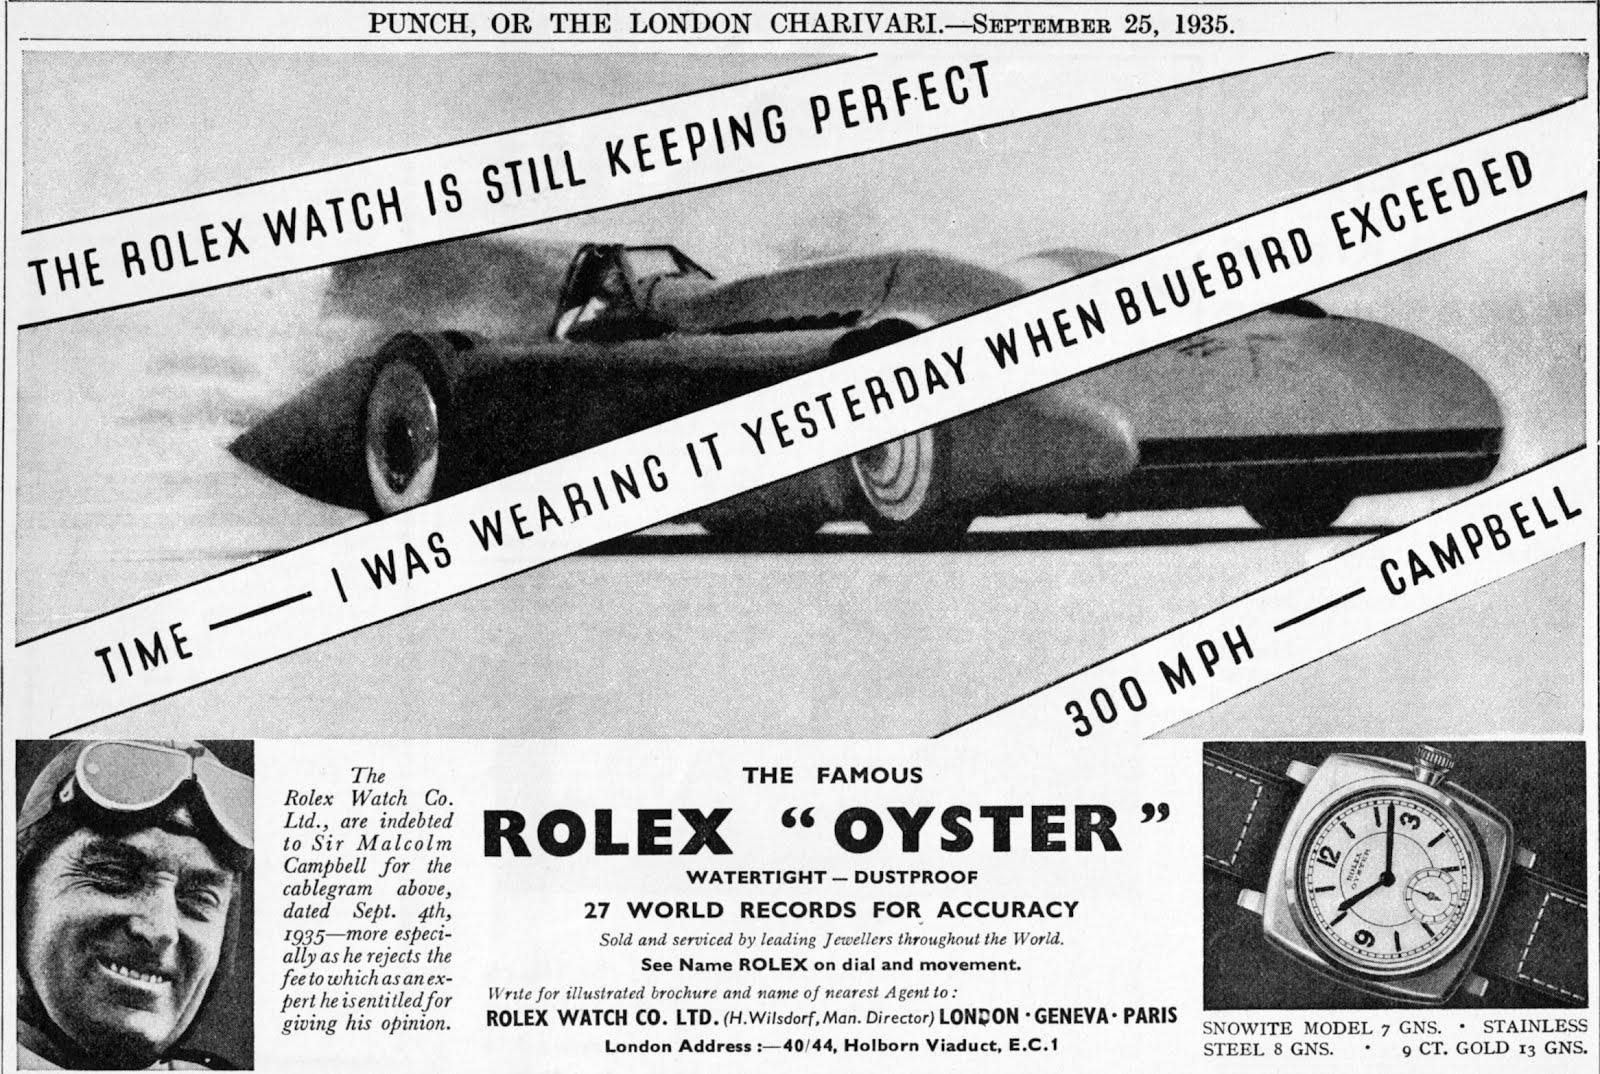 Malcolm Campbell Speed Record Rolex 1935